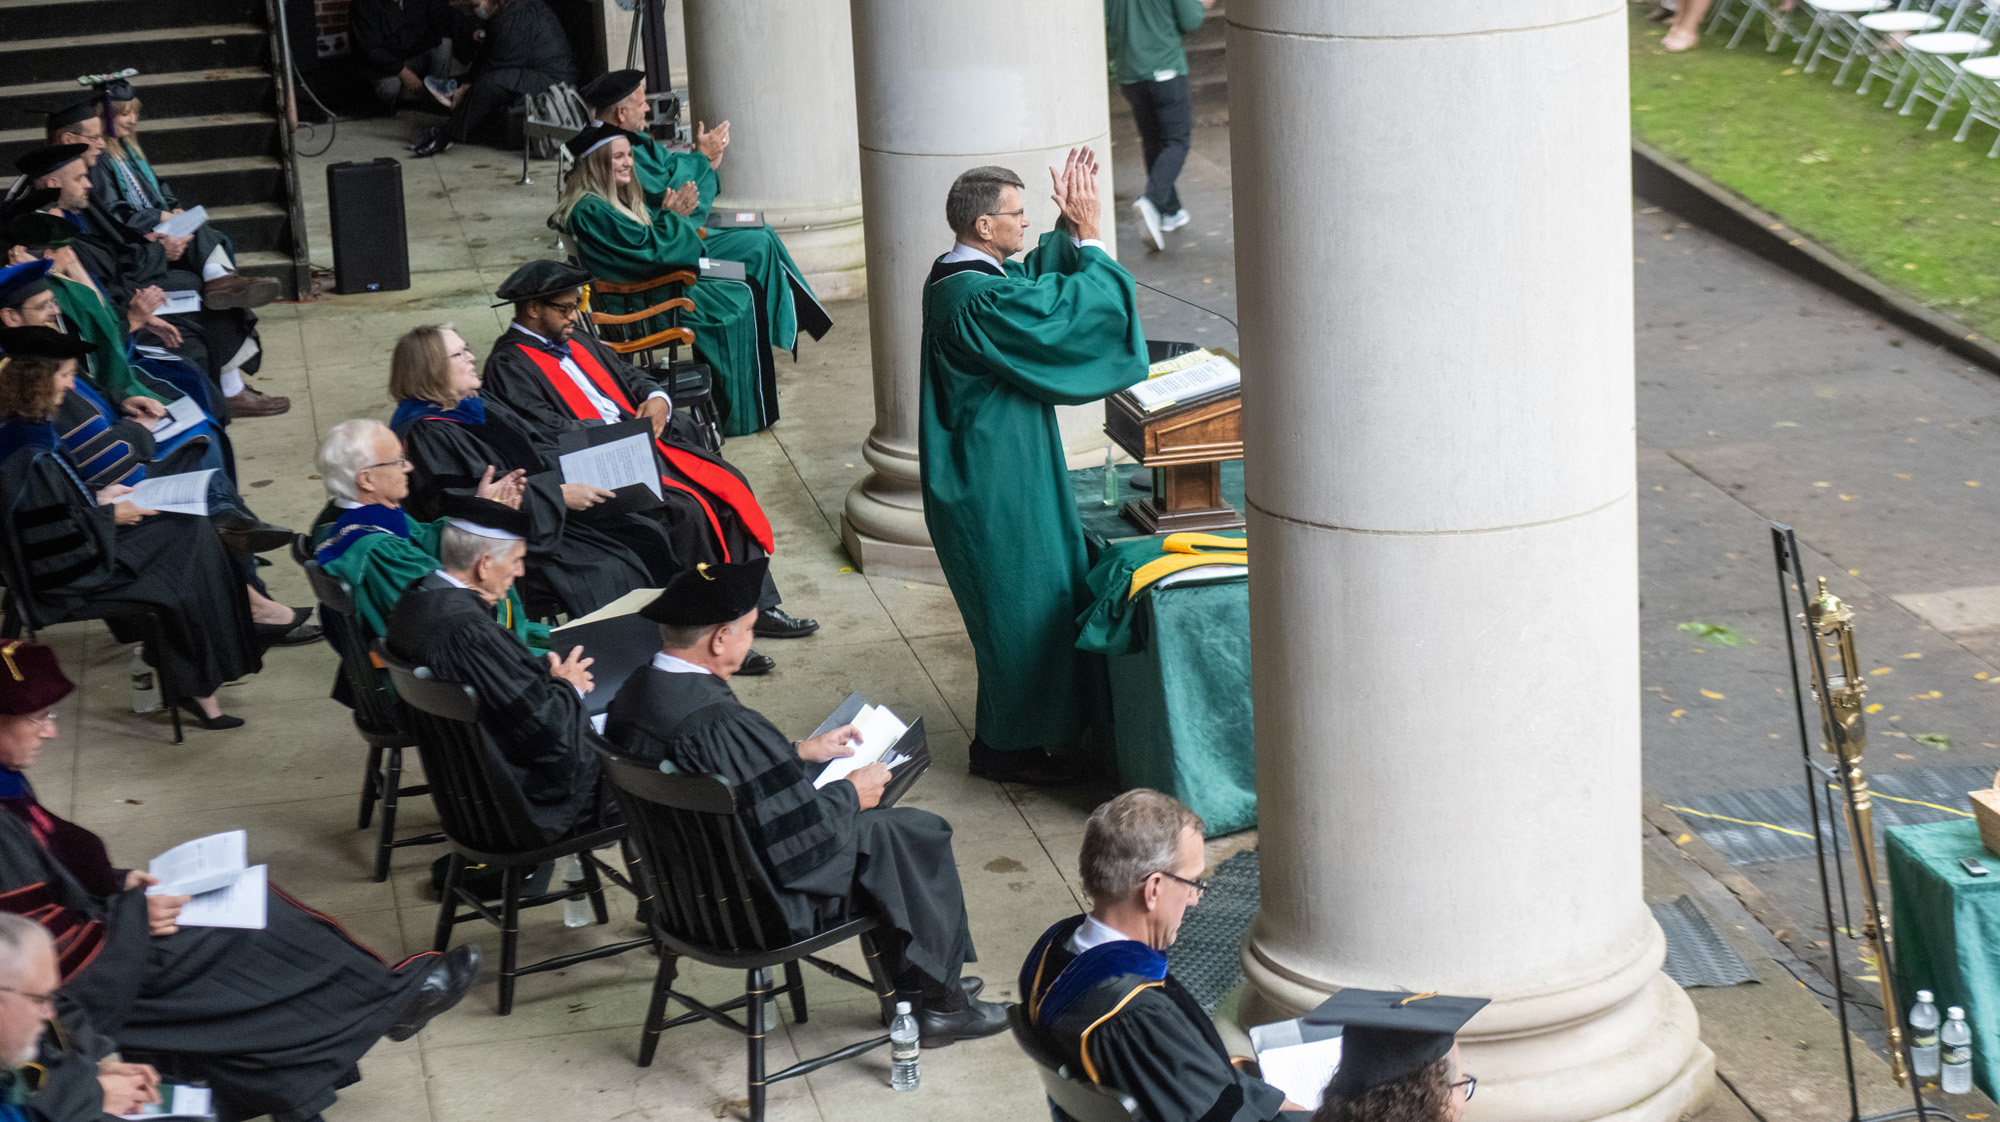 The faculty and administration arranged under the awning behind Memorial Auditorium